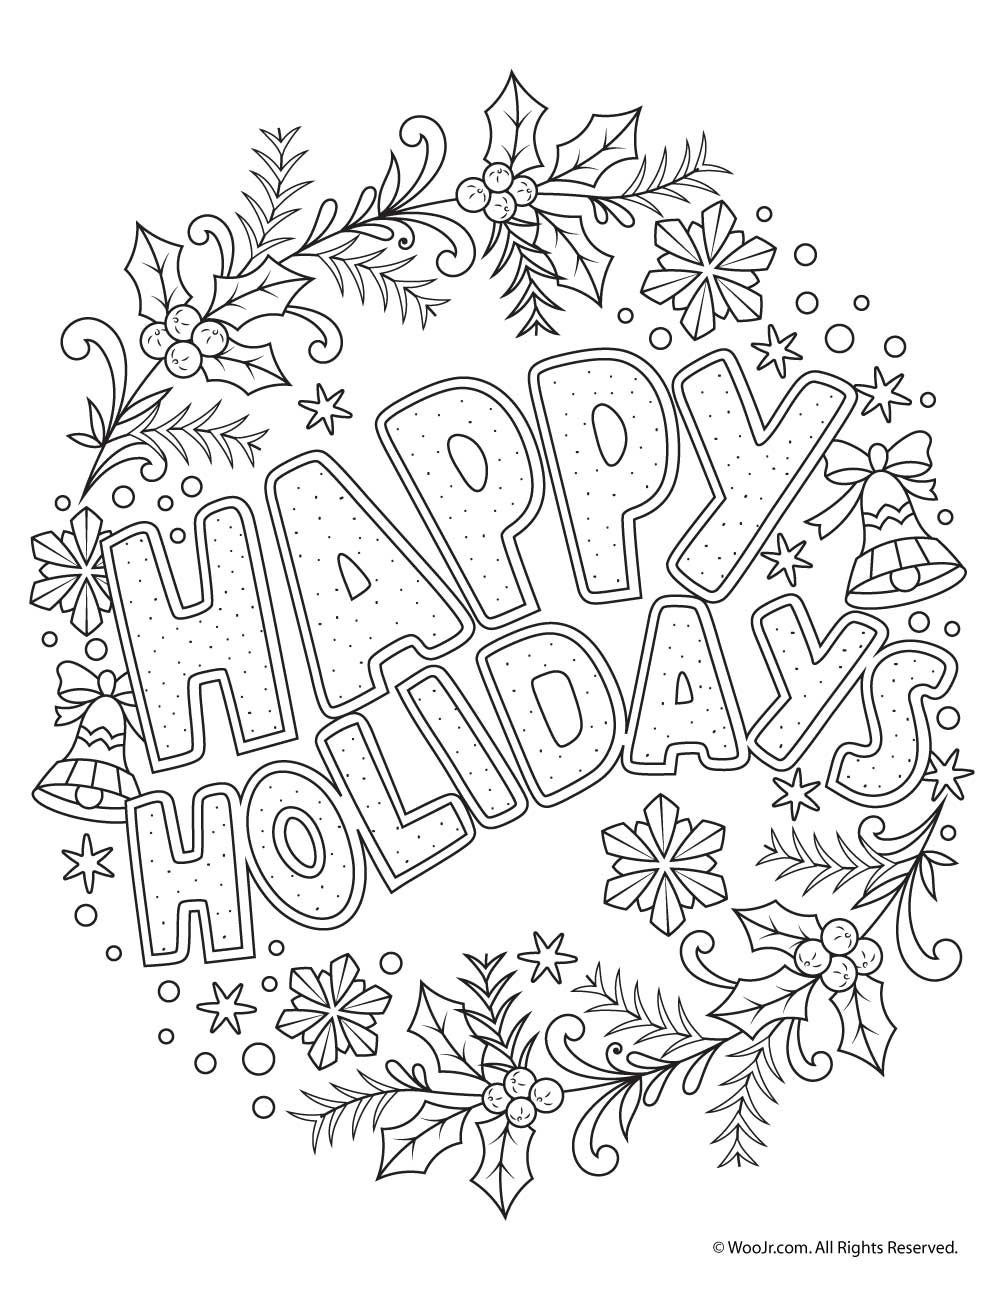 Beautiful Printable Christmas Adult Coloring Pages | Coloring Pages - Free Printable Christmas Coloring Pages